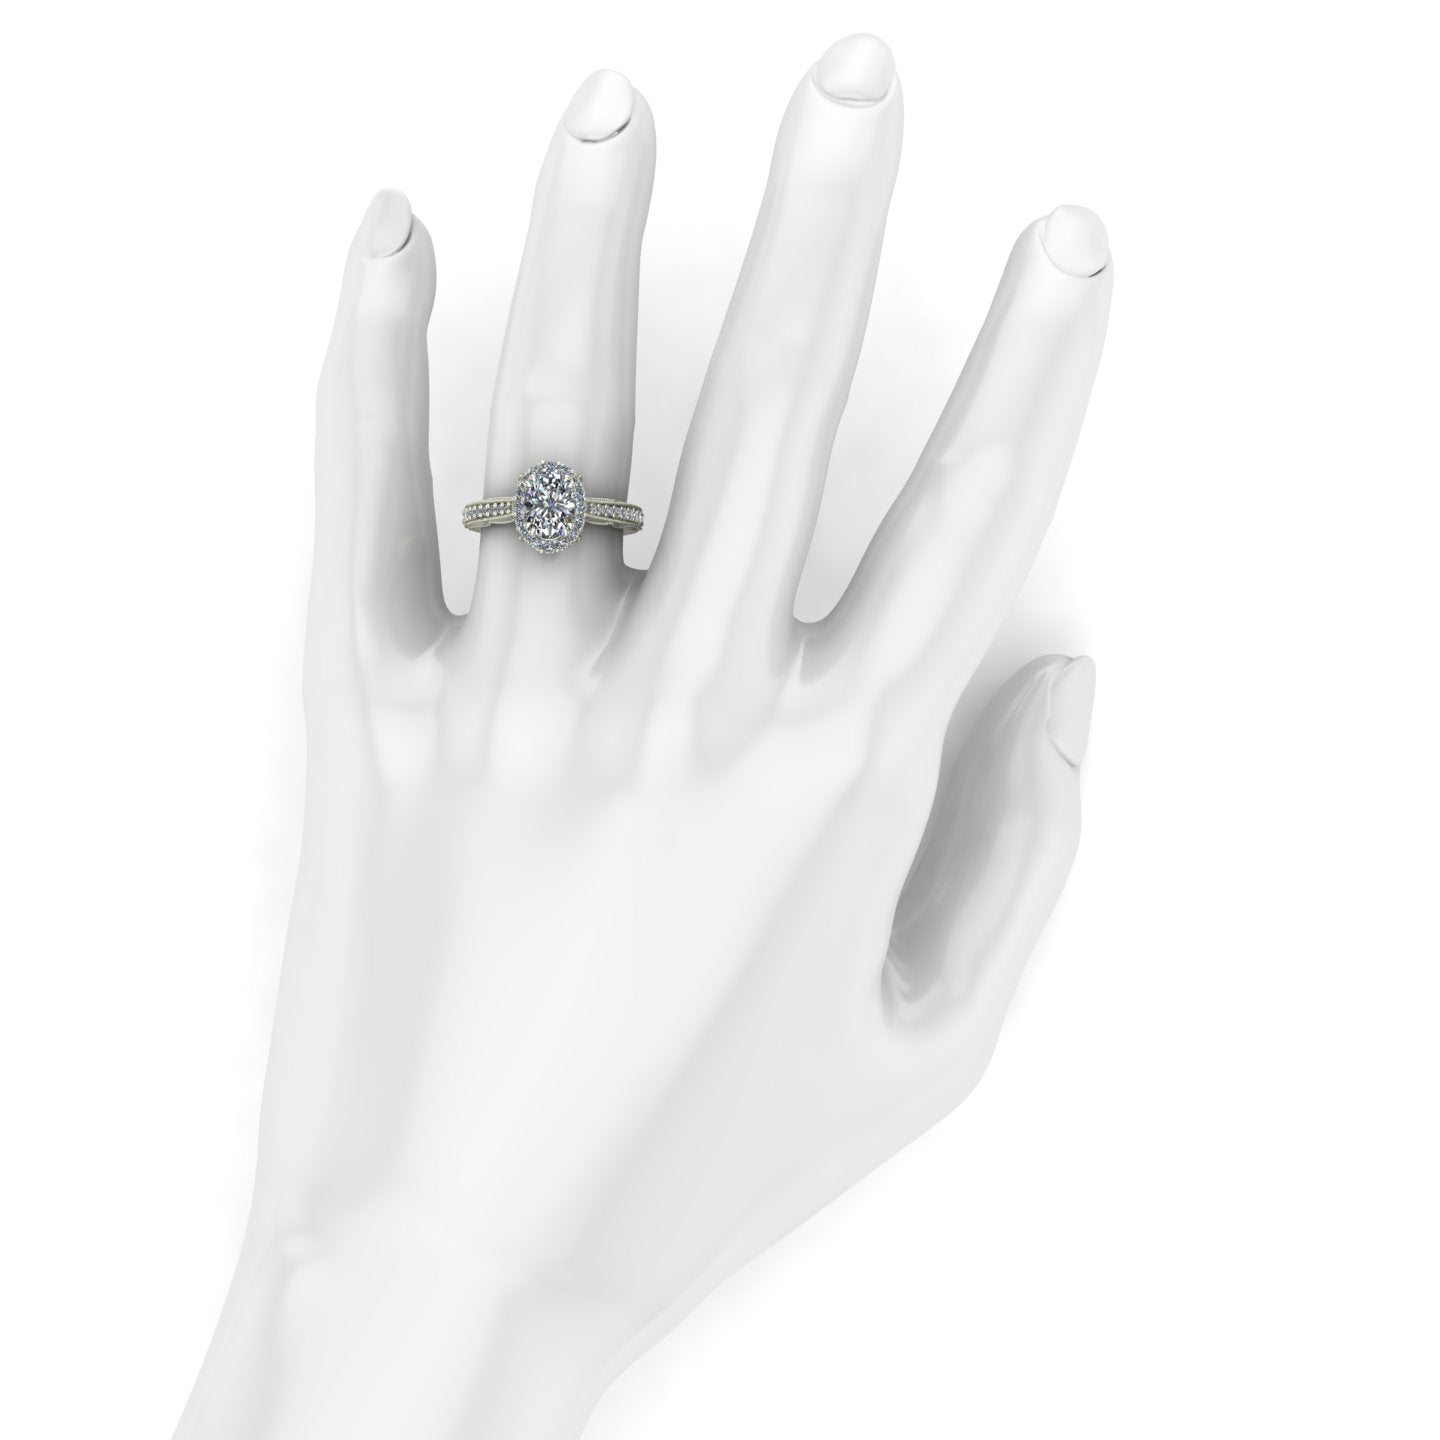 one carat oval diamond halo engagement ring in 14k white gold - Charles Babb Designs - on hand